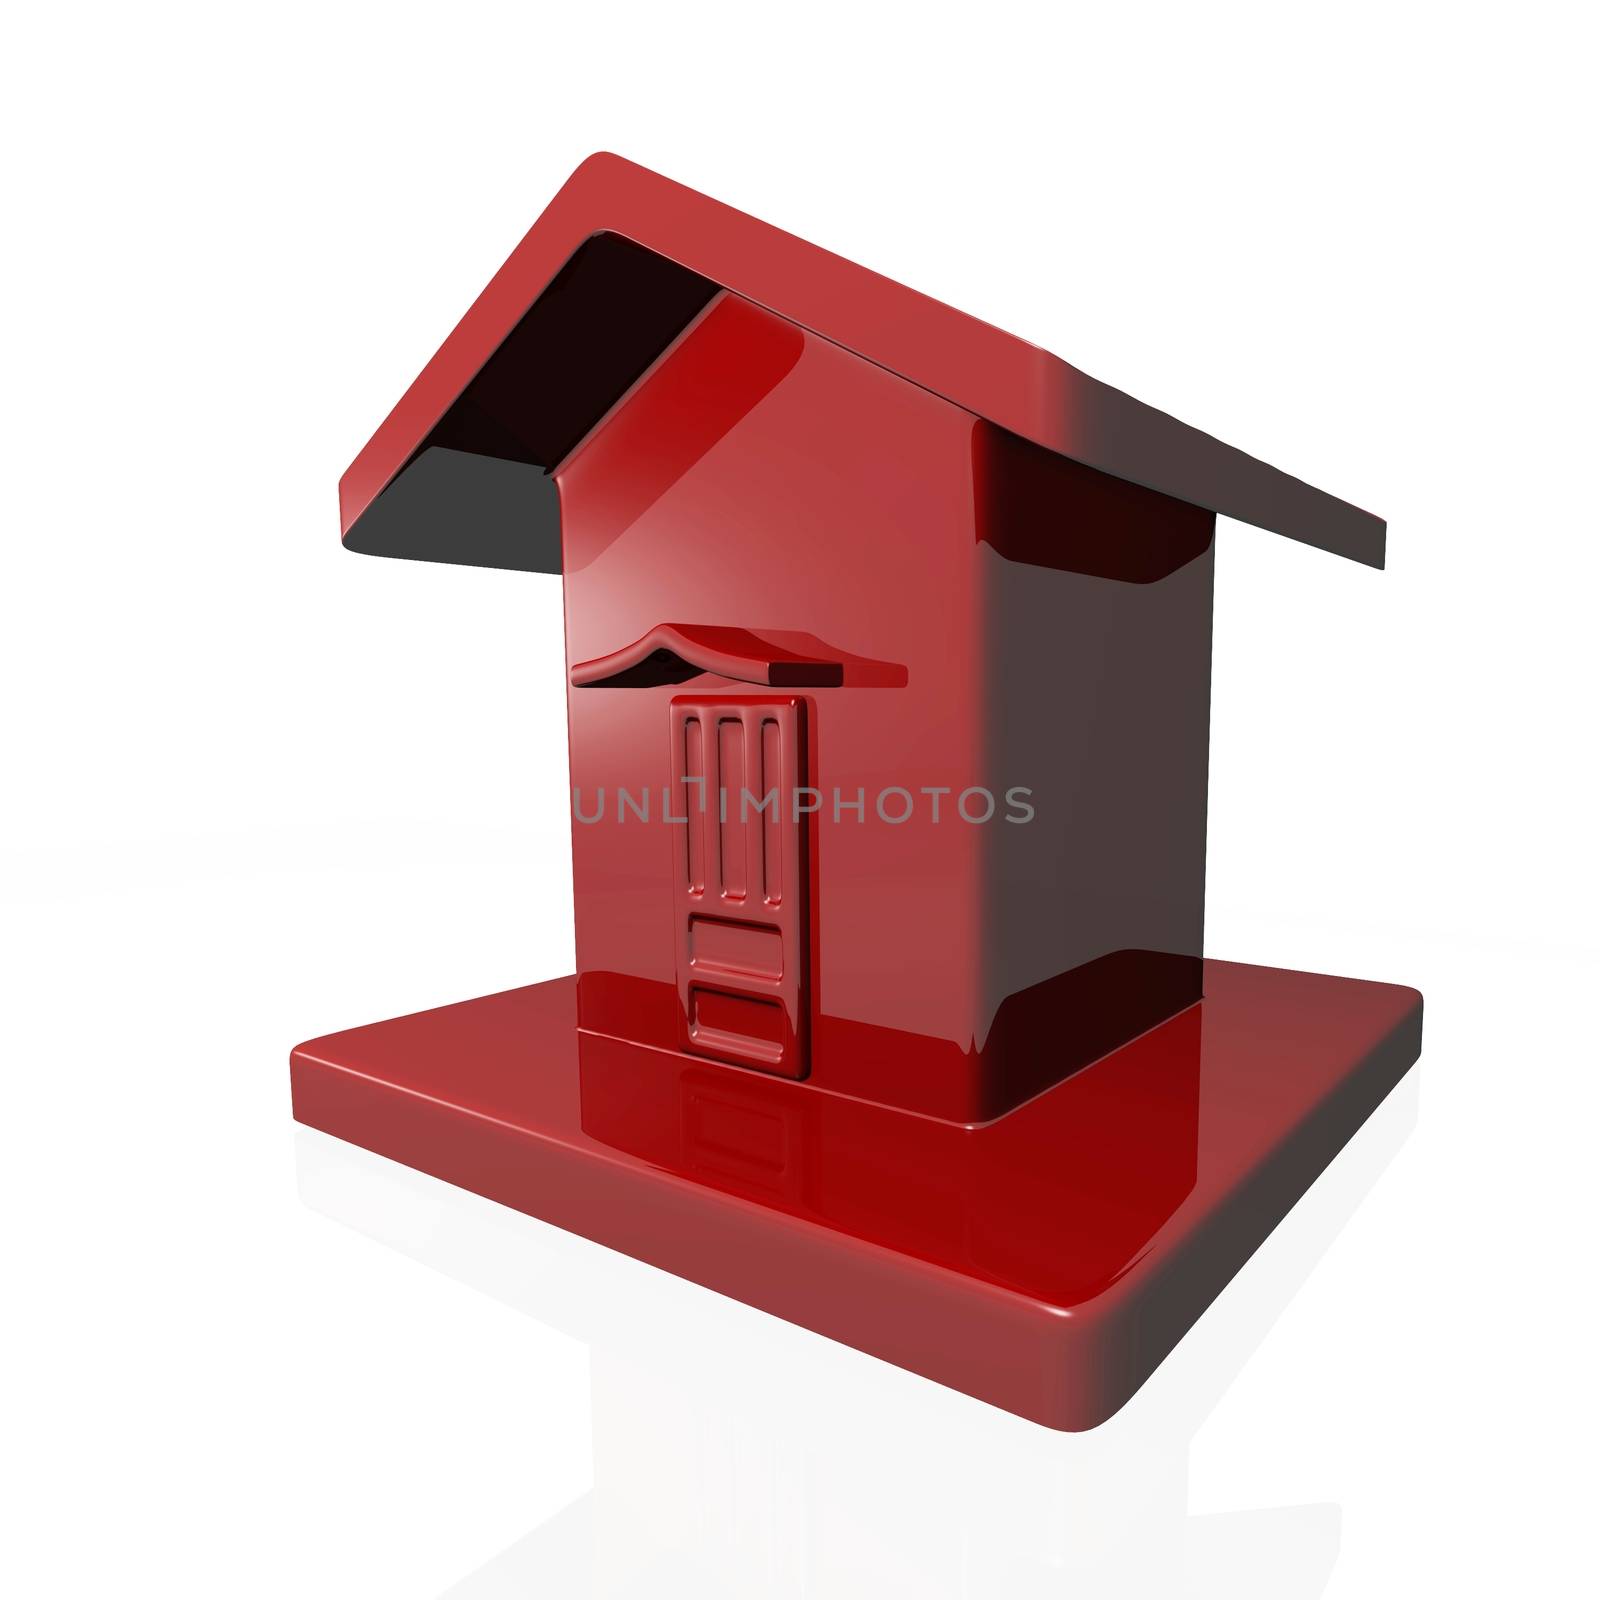 A small red plastic house model. It can be used either as a home icon or for concepts like - real estate, housing, and property.
